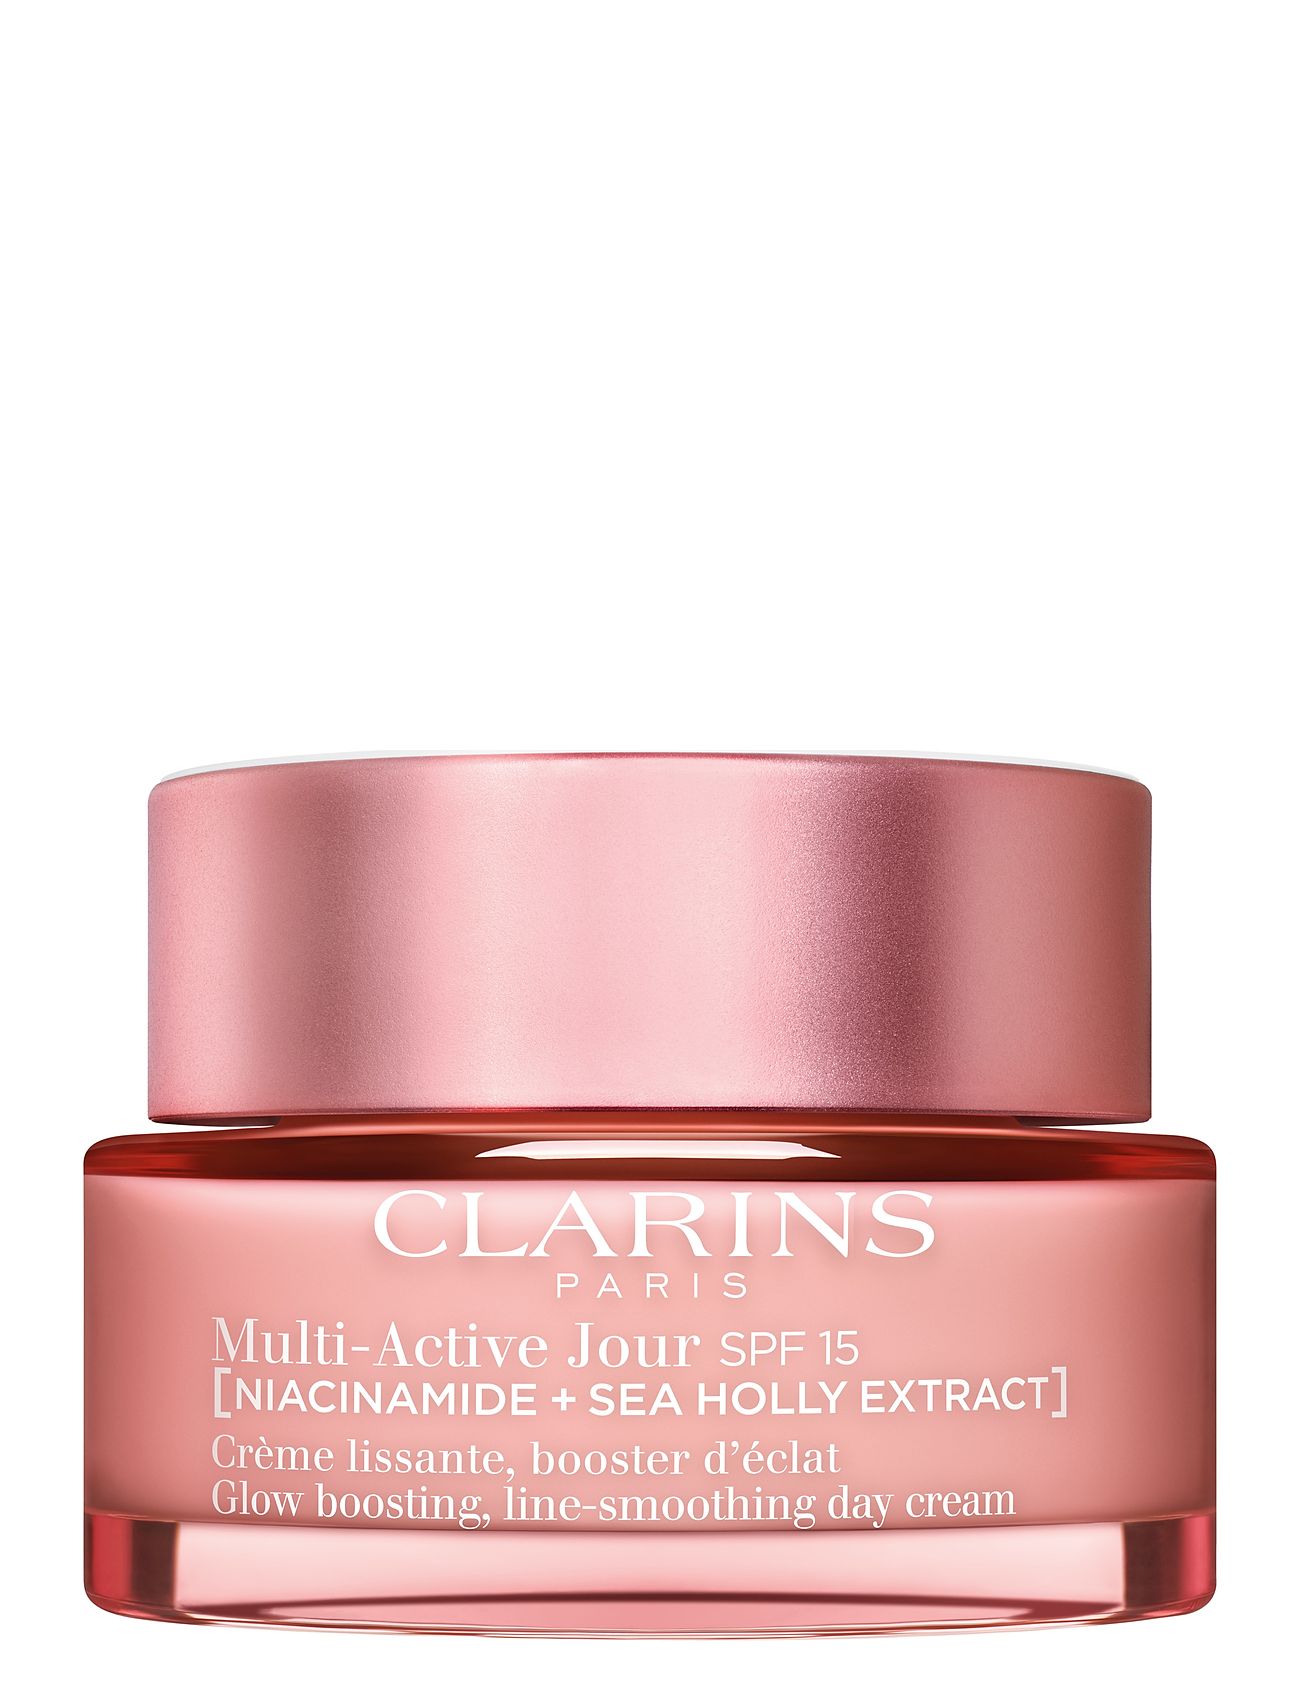 Multi-Acive Glow Boosting, Line-Smoothing Day Cream Spf 15 All Skin Types Fugtighedscreme Dagcreme Nude Clarins